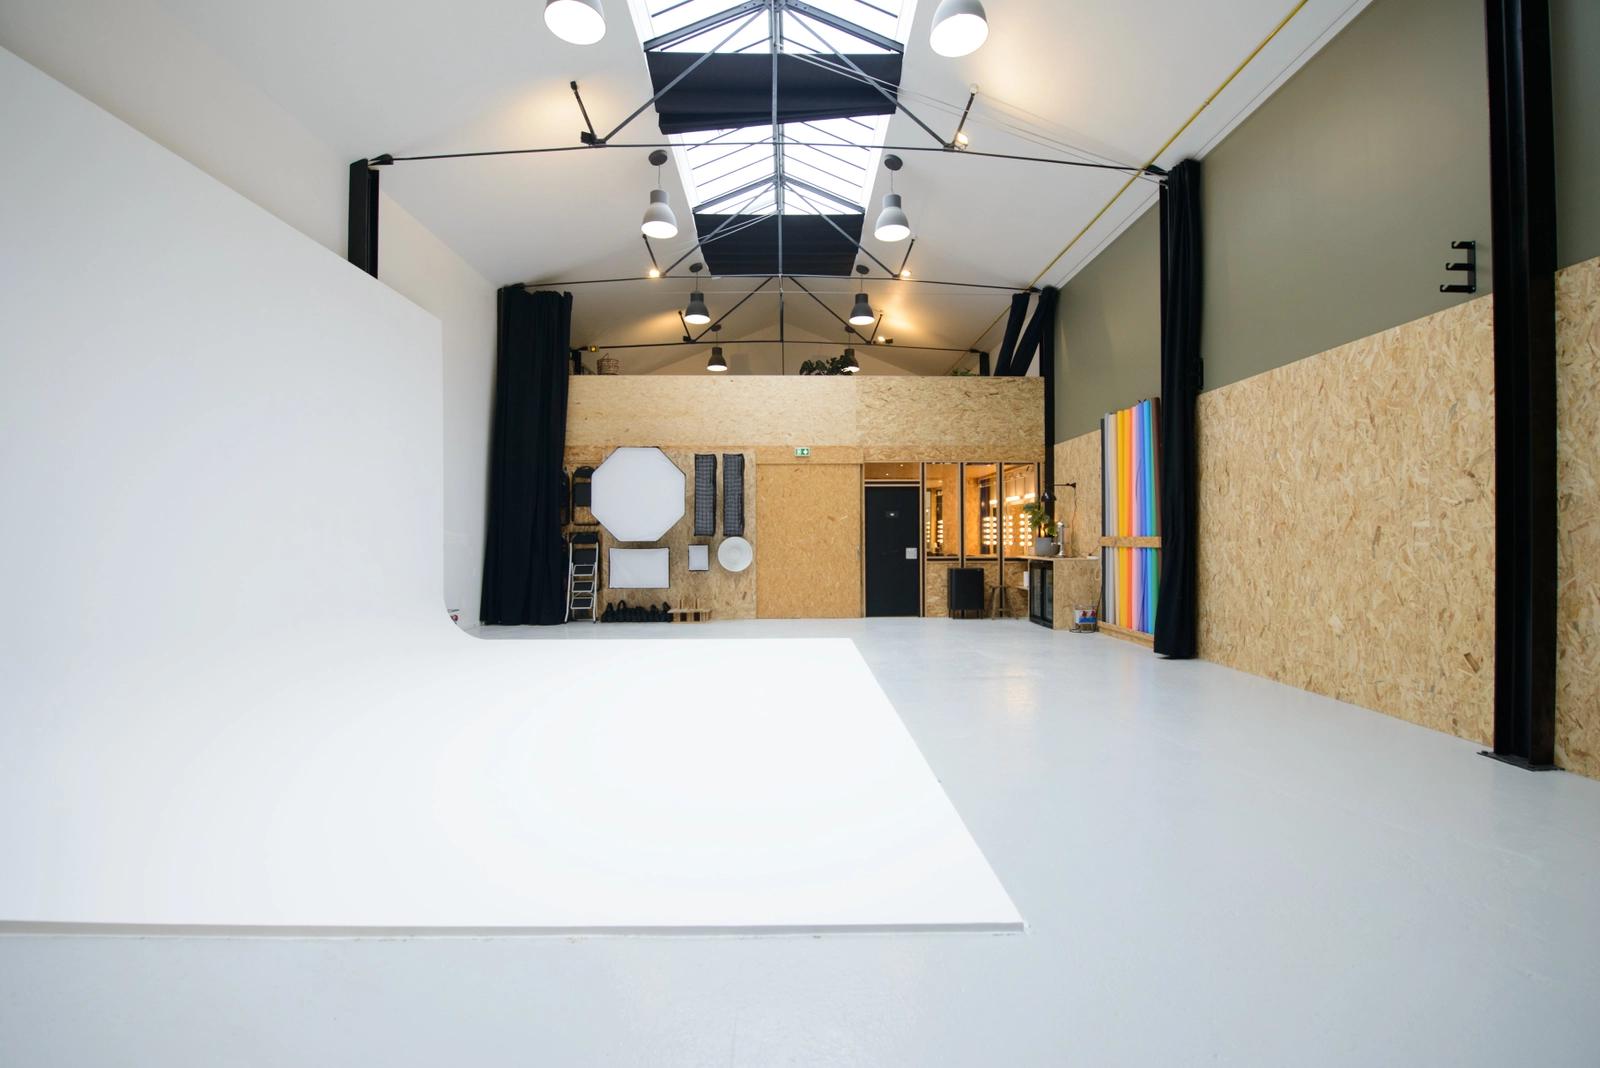 Space Daylight studio cyclo in Aubervilliers - 0